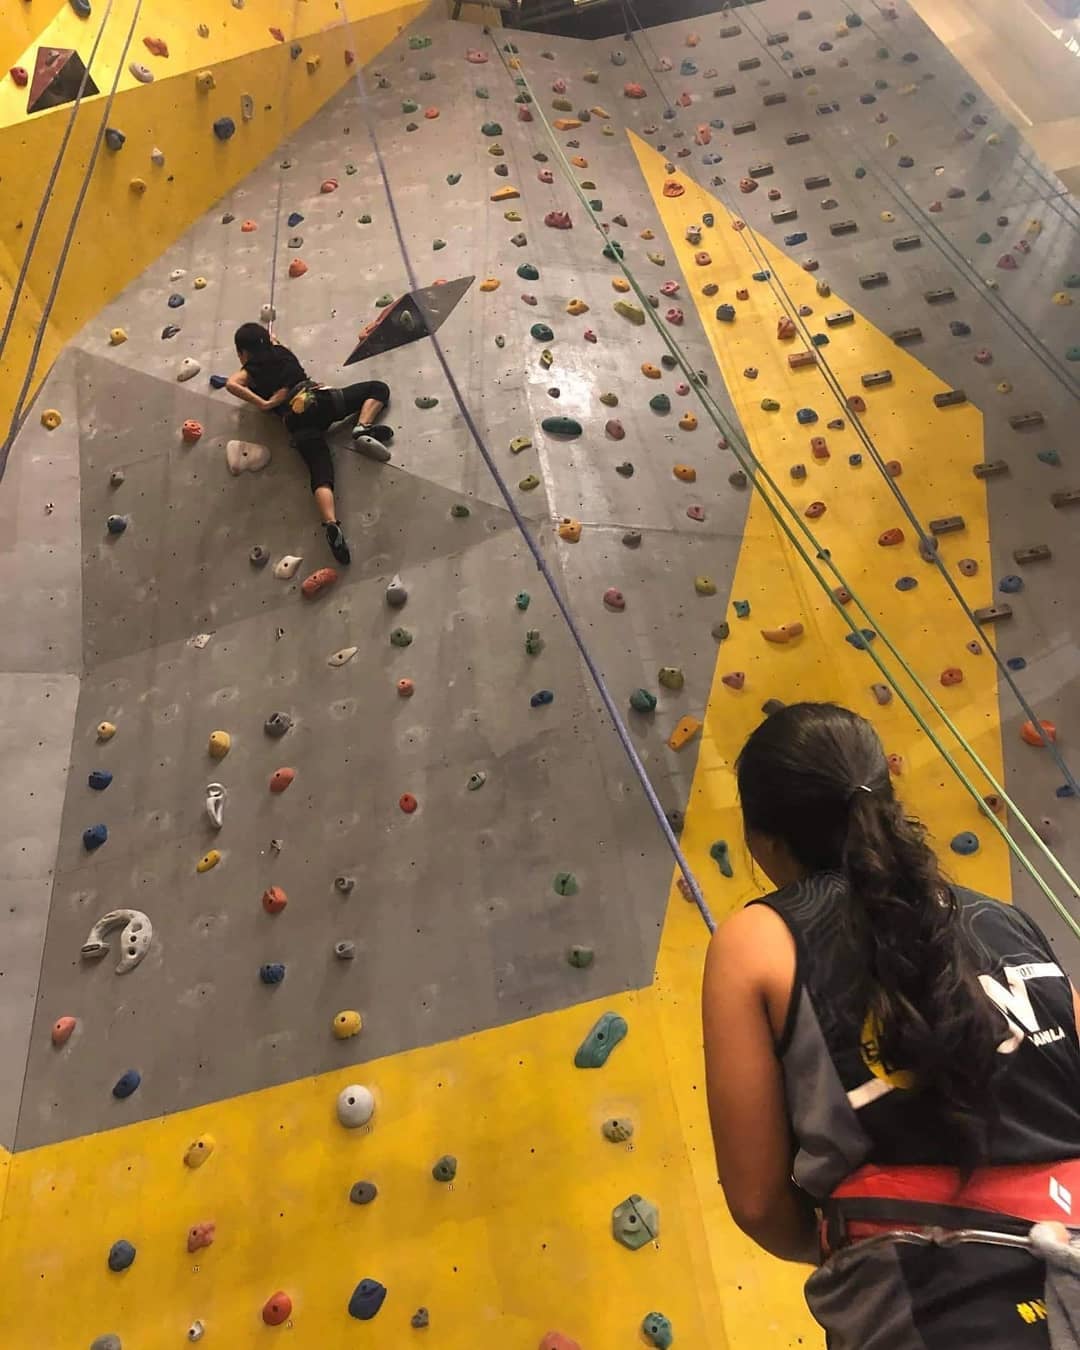 ROX indoor rock climbing - one of the fun things to do in BGC